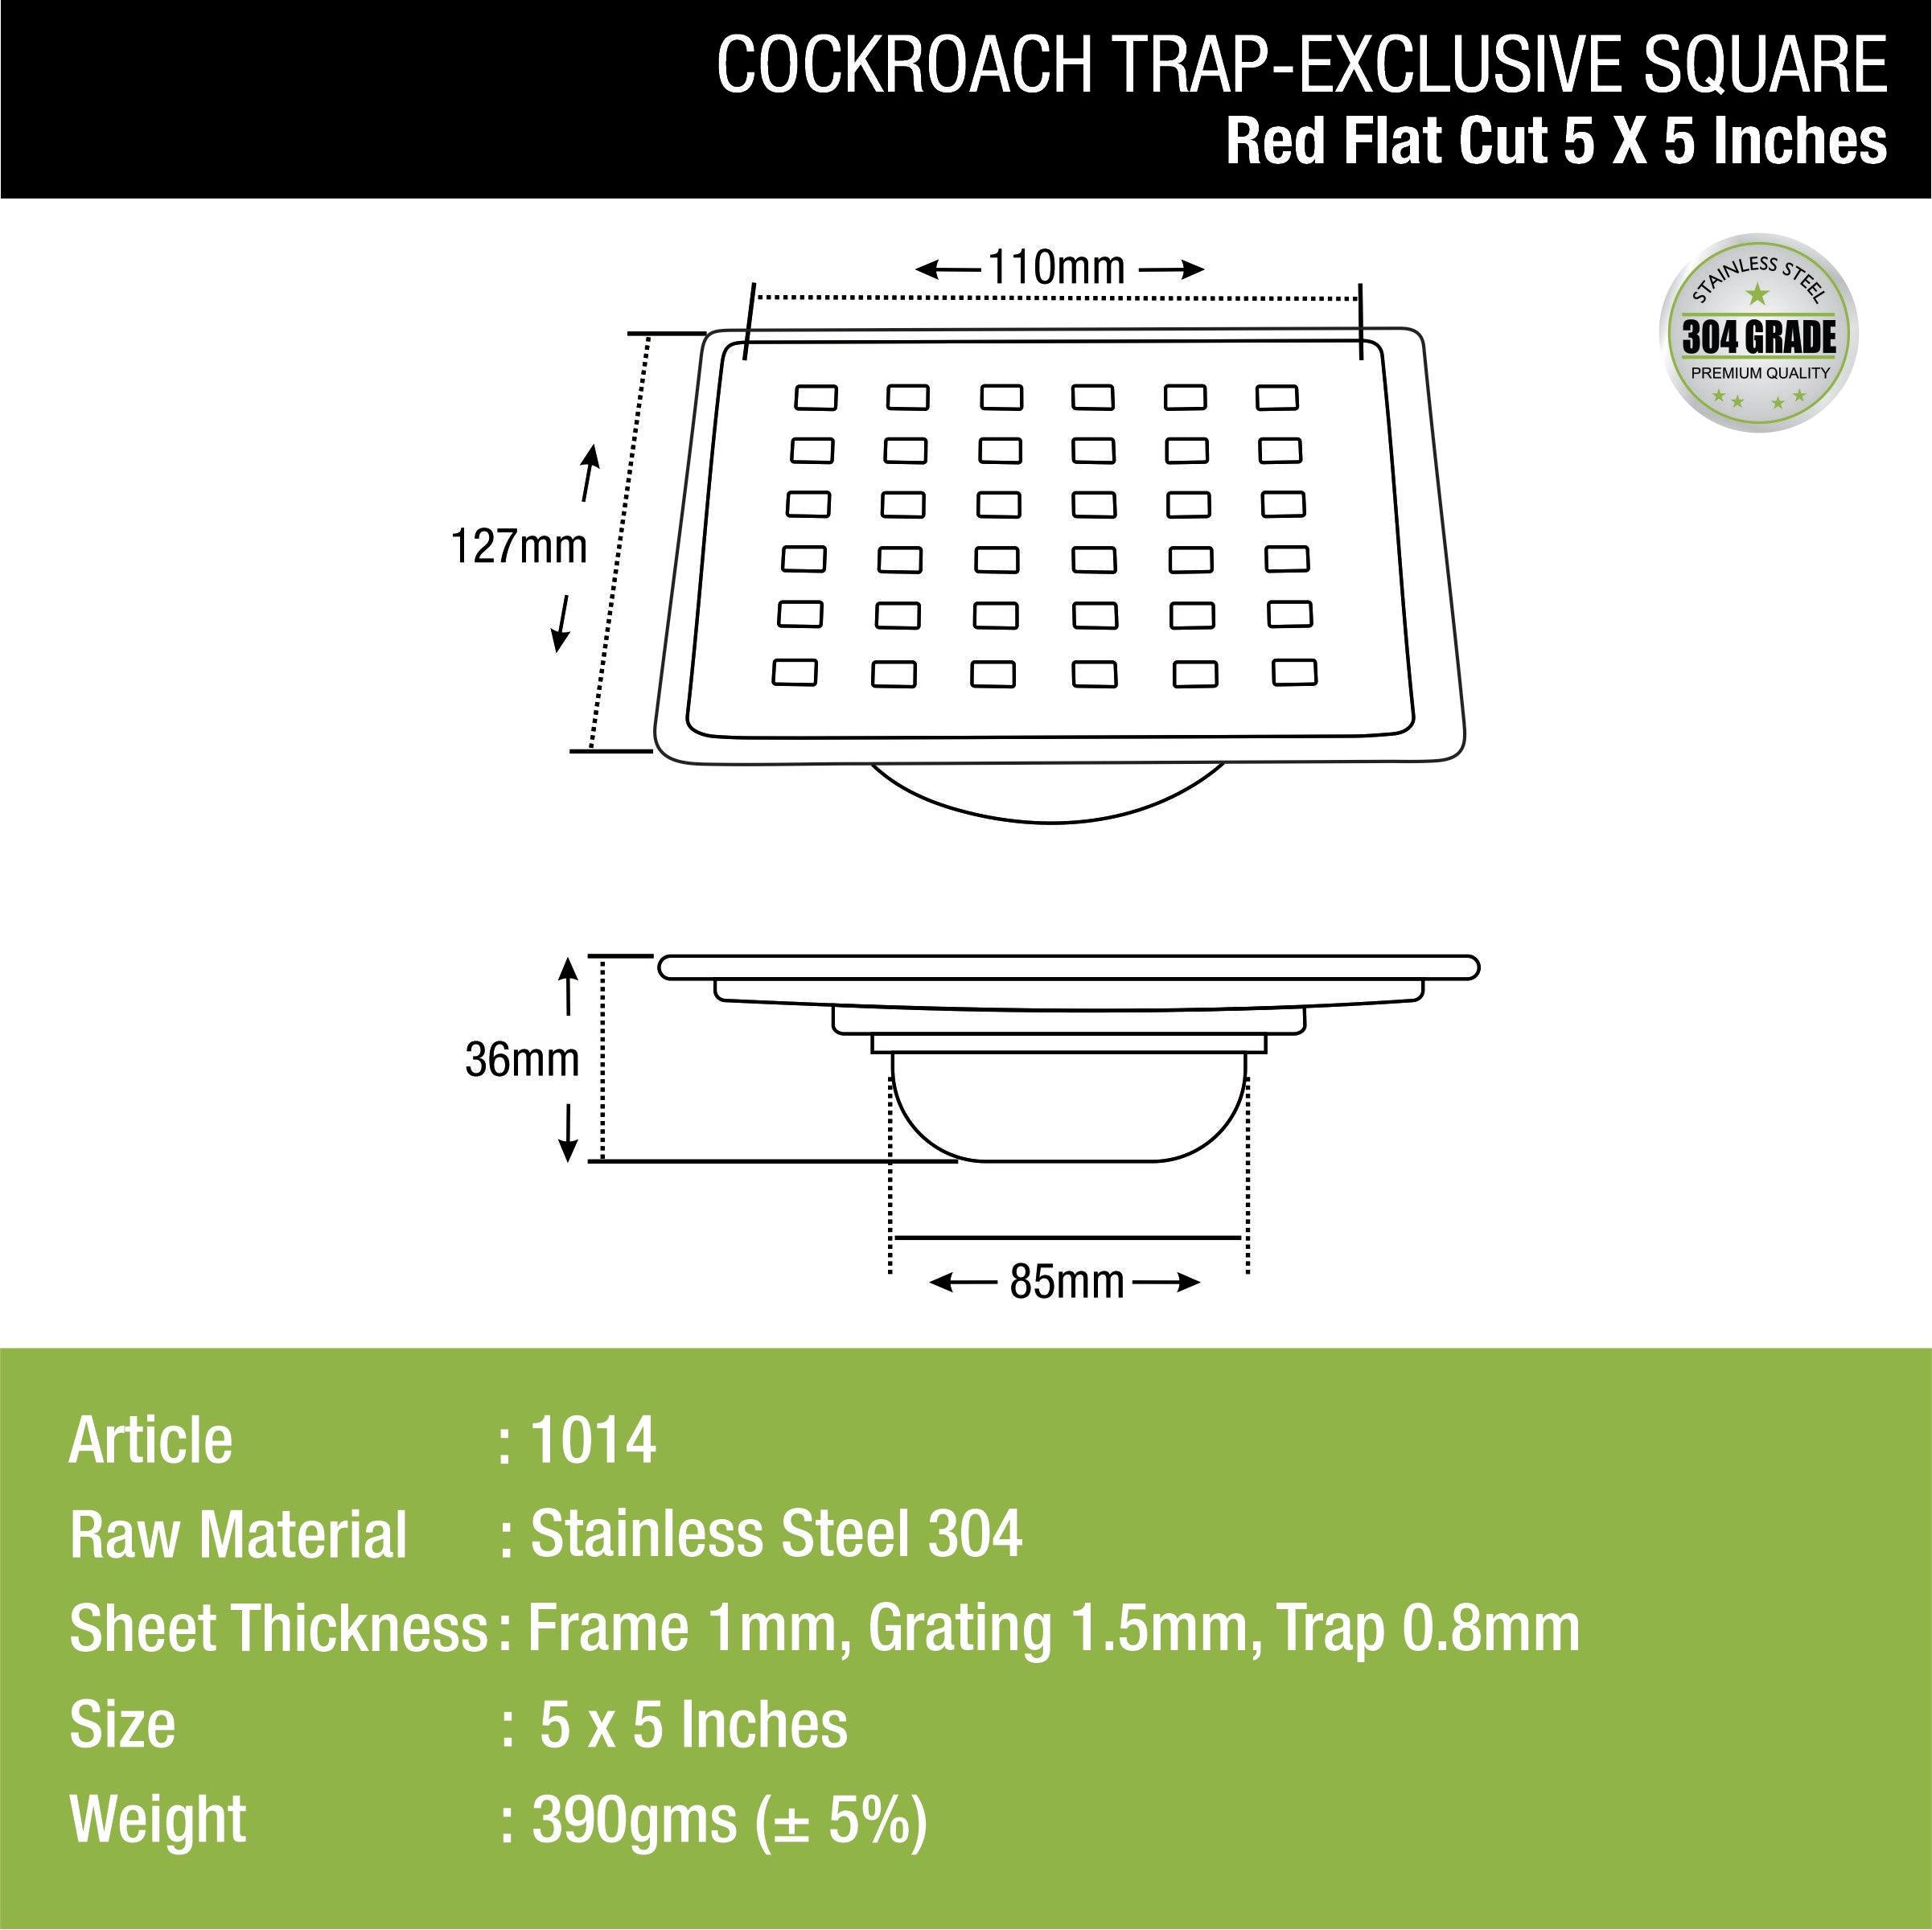 Red Exclusive Square Flat Cut Floor Drain (5 x 5 Inches) with Cockroach Trap dimensions and sizes